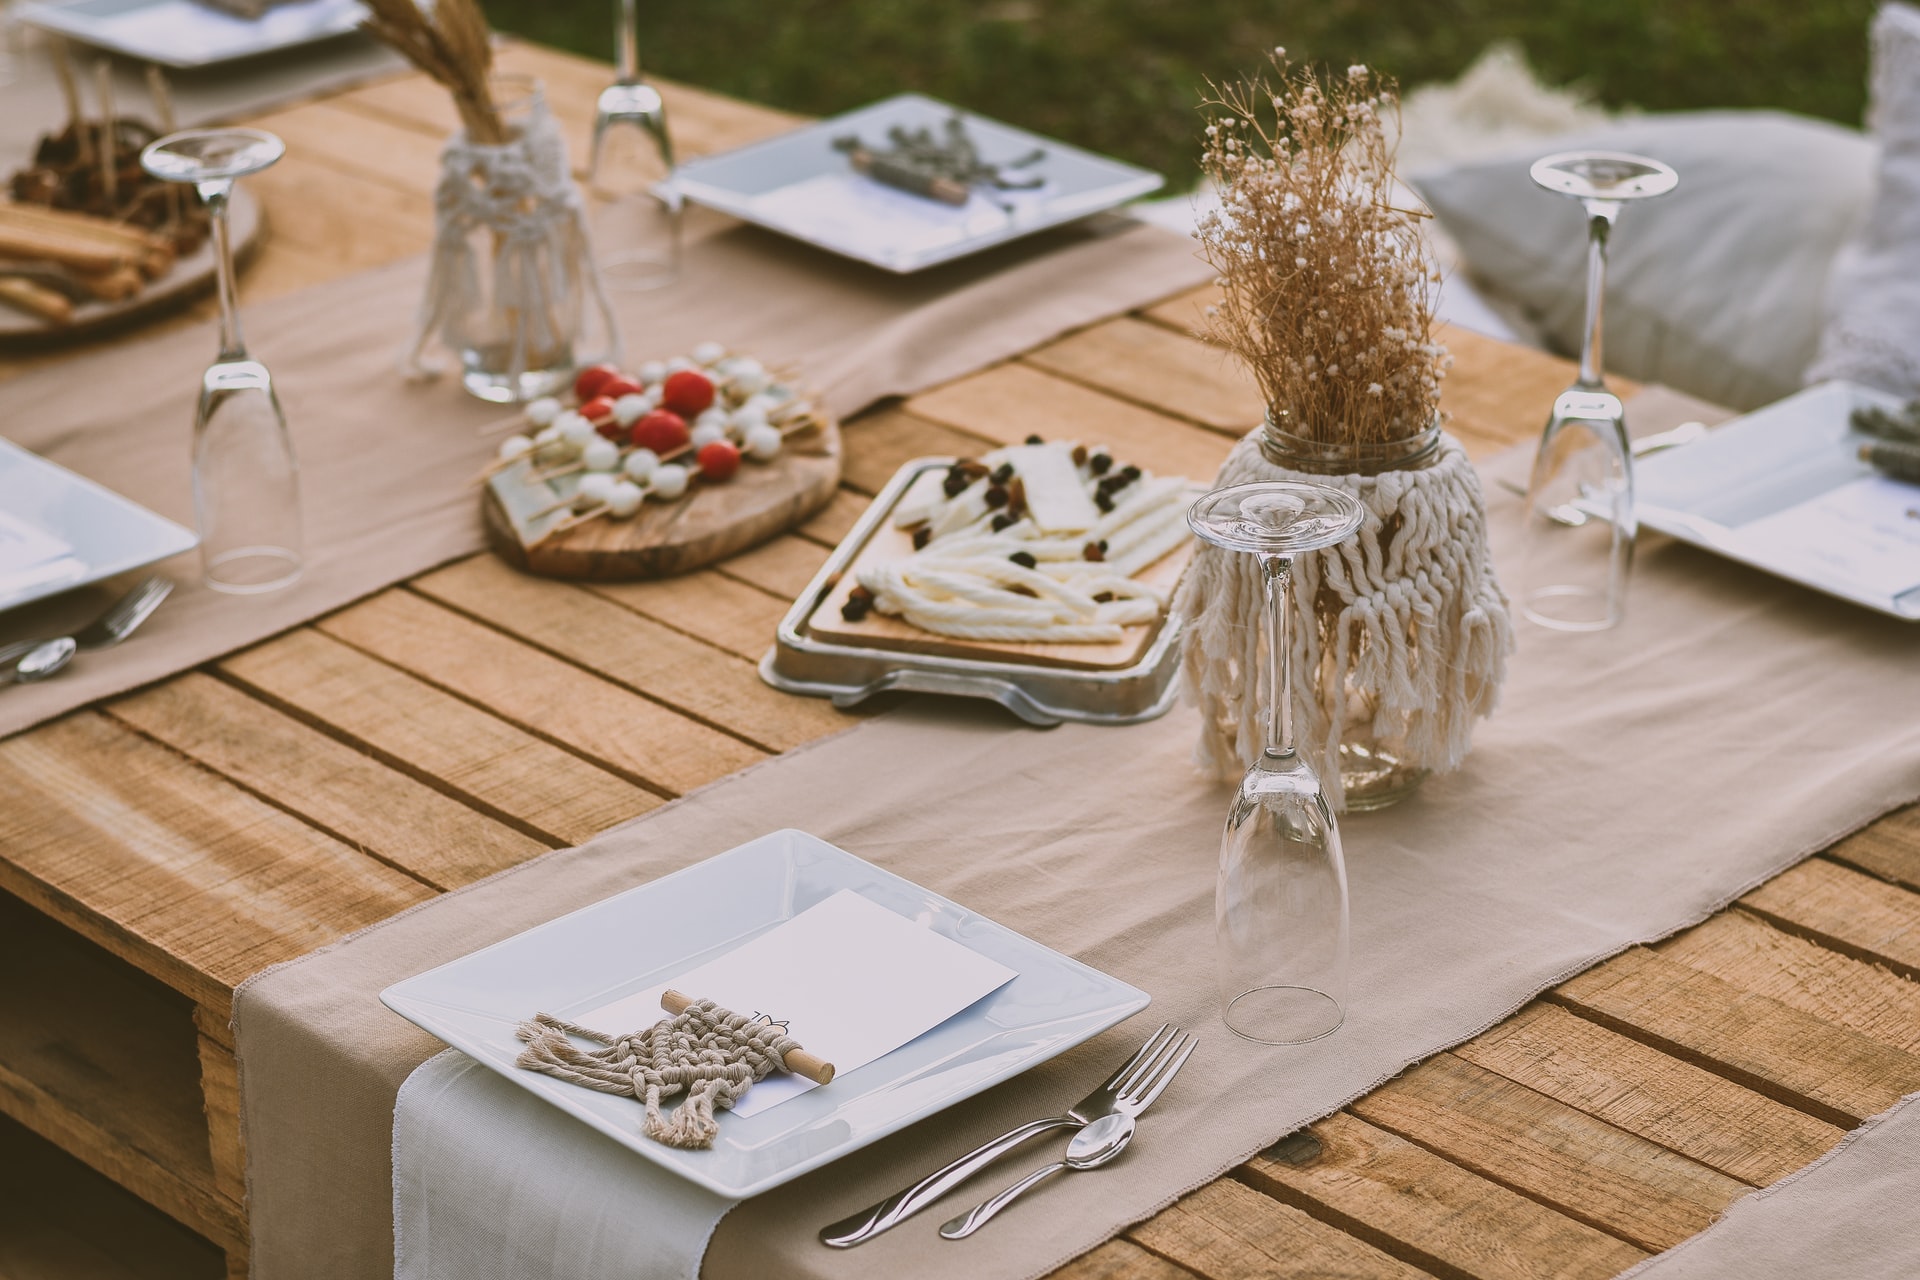 What to put on the table instead of a tablecloth? Our tips!